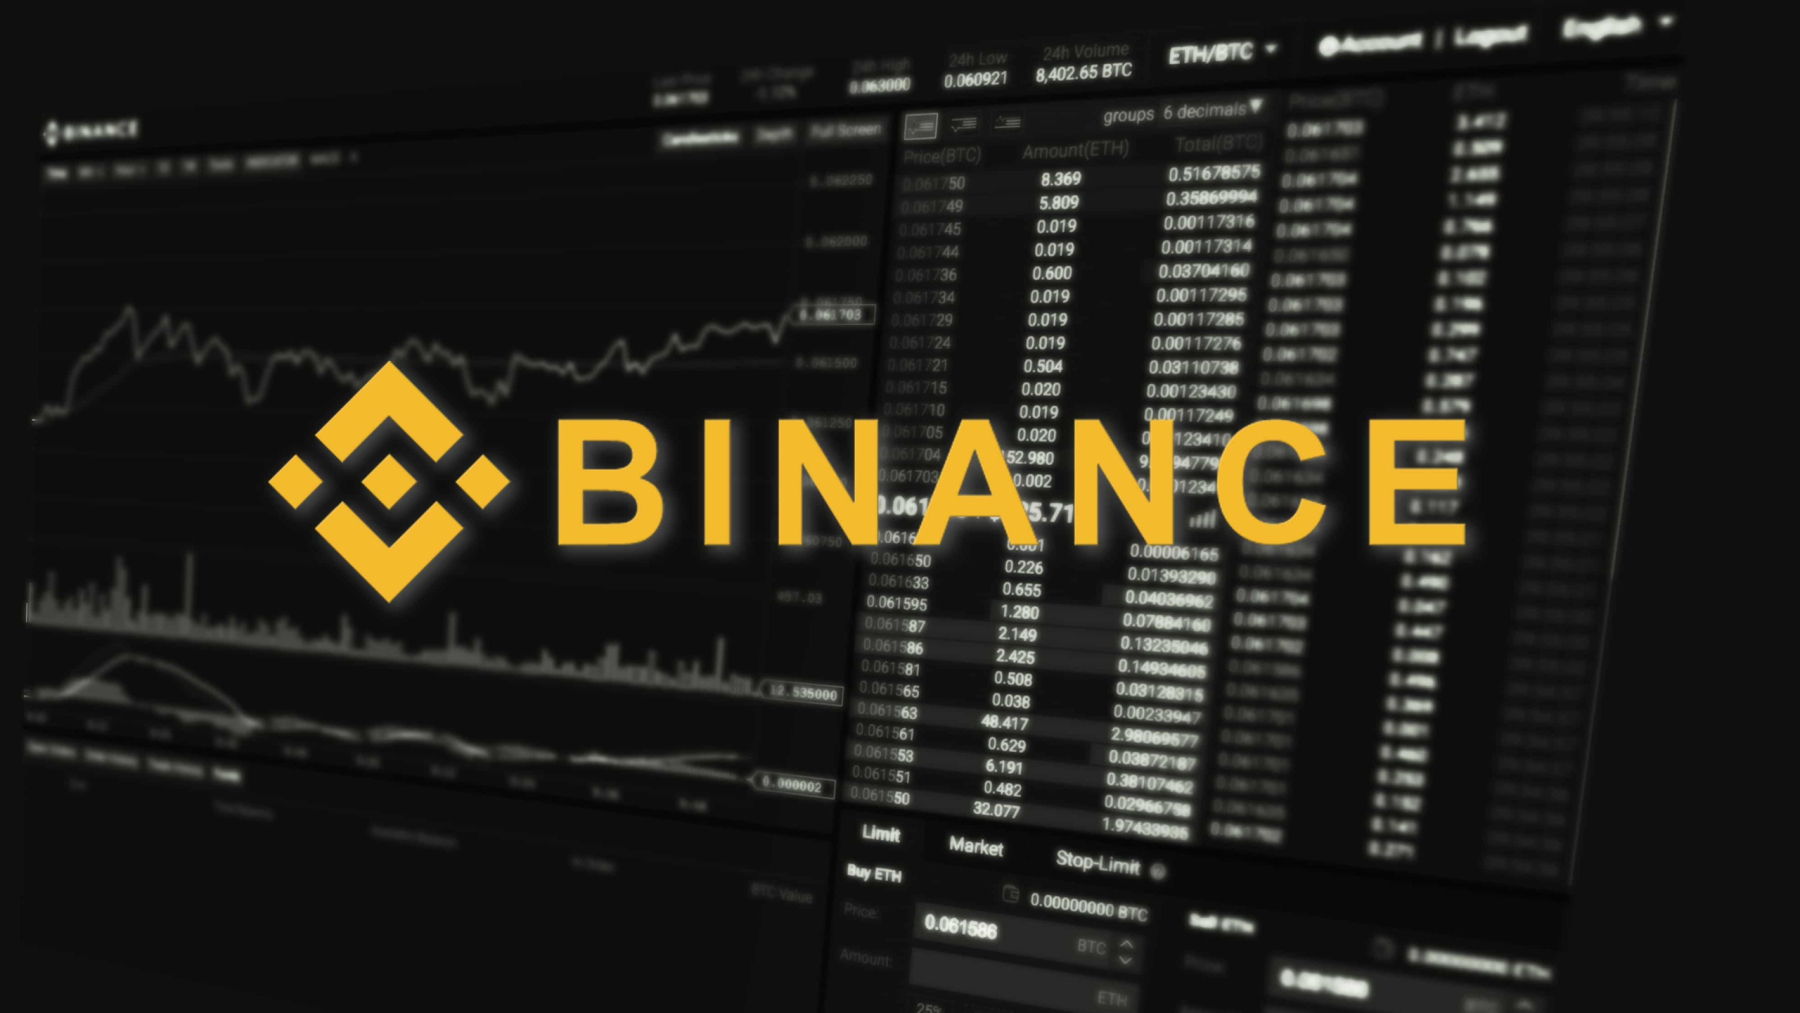 Reuters discovers 'FTX-like' practices at Binance
